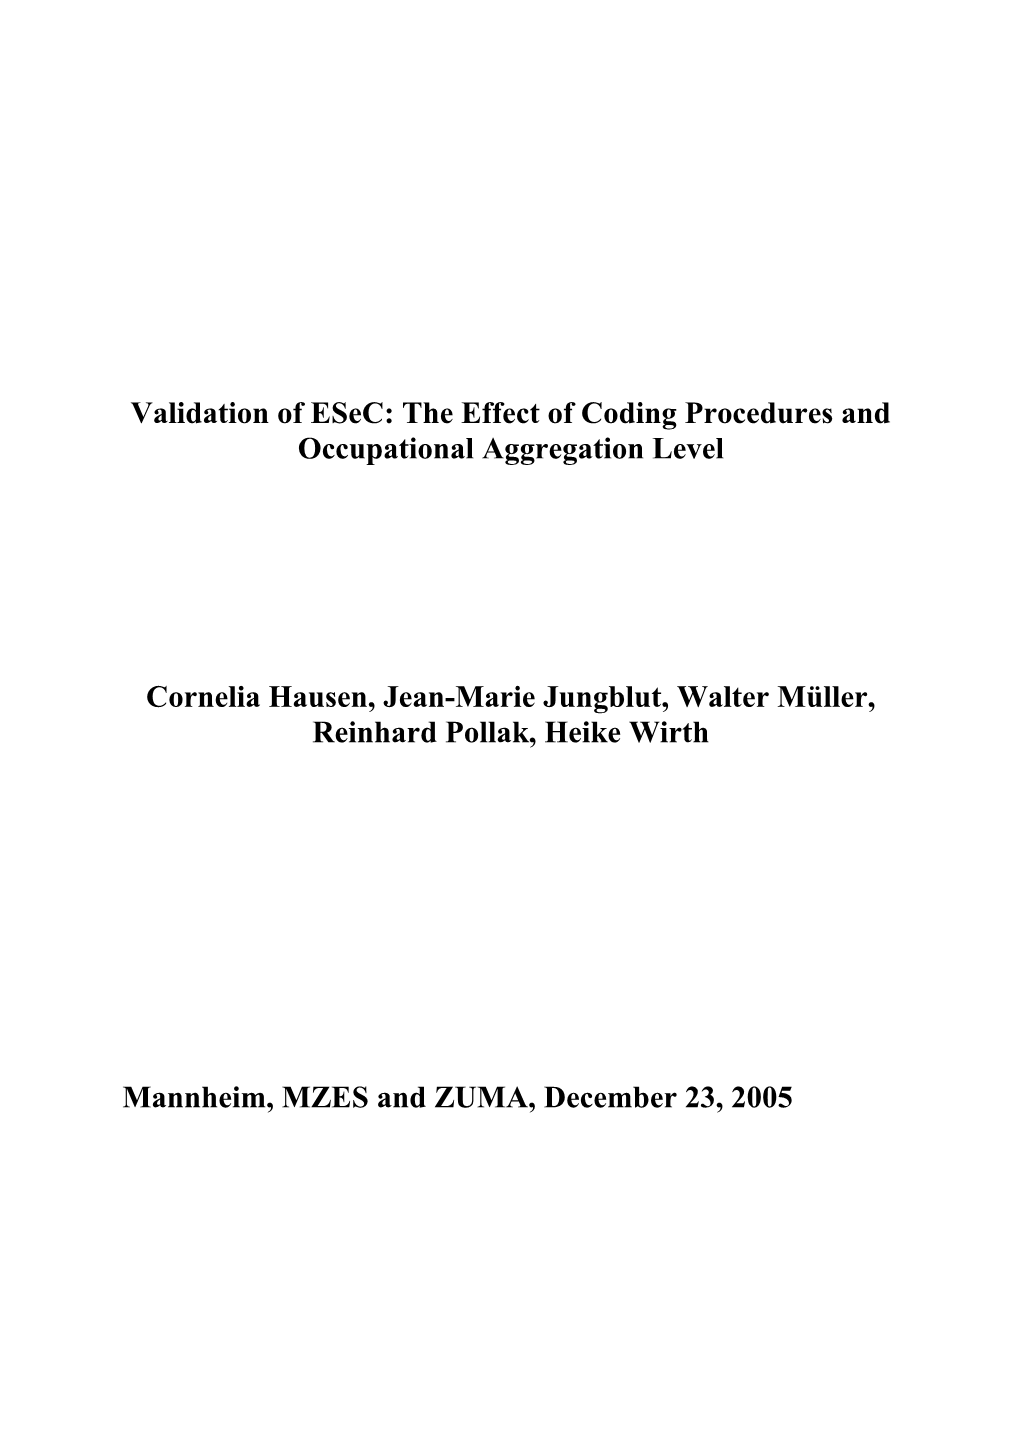 Validation of Esec: the Effect of Coding Procedures and Occupational Aggregation Level